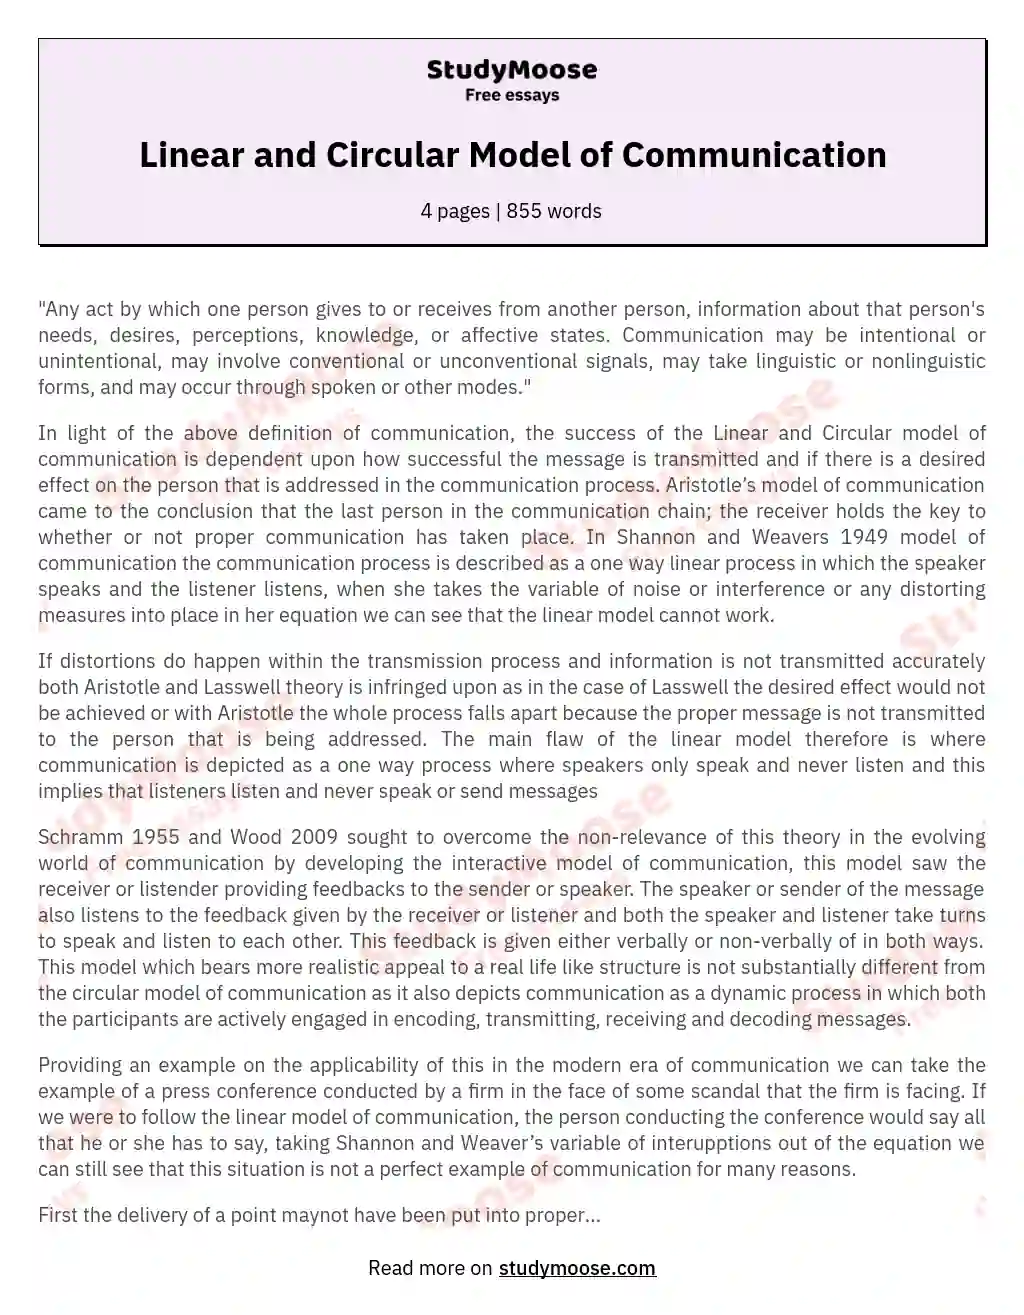 Linear and Circular Model of Communication essay